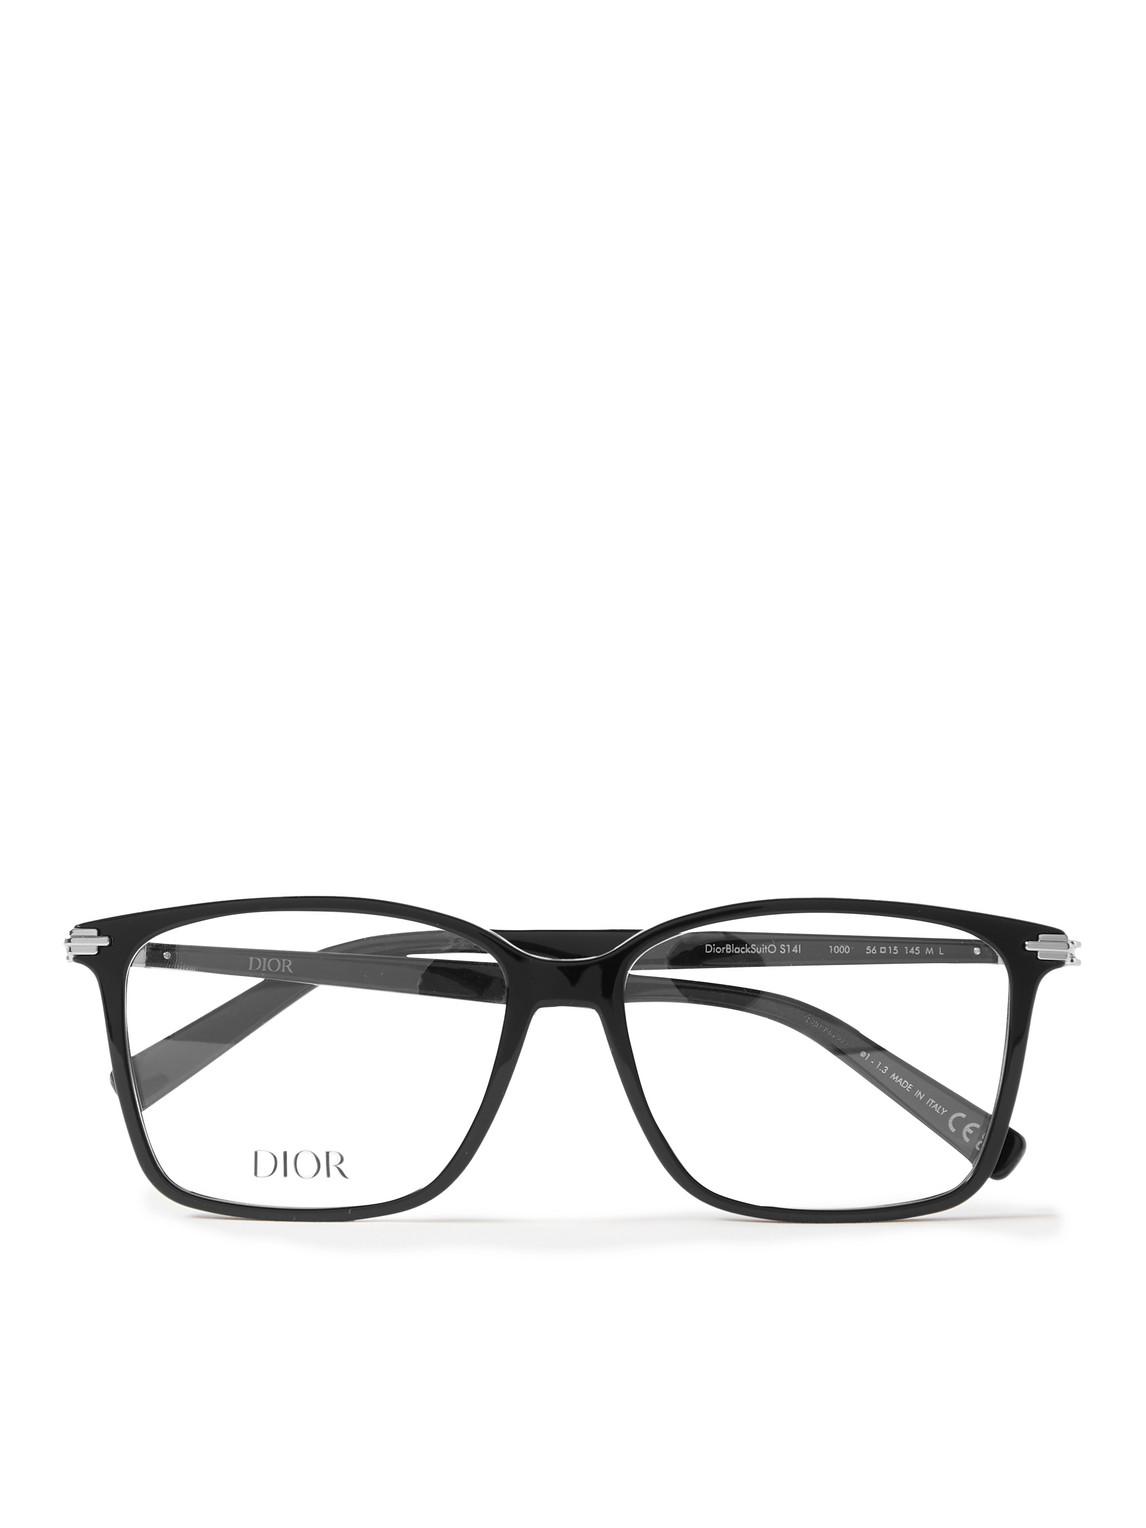 DiorBlackSuit S14l Square-Frame Acetate and Silver-Tone Optical Glasses